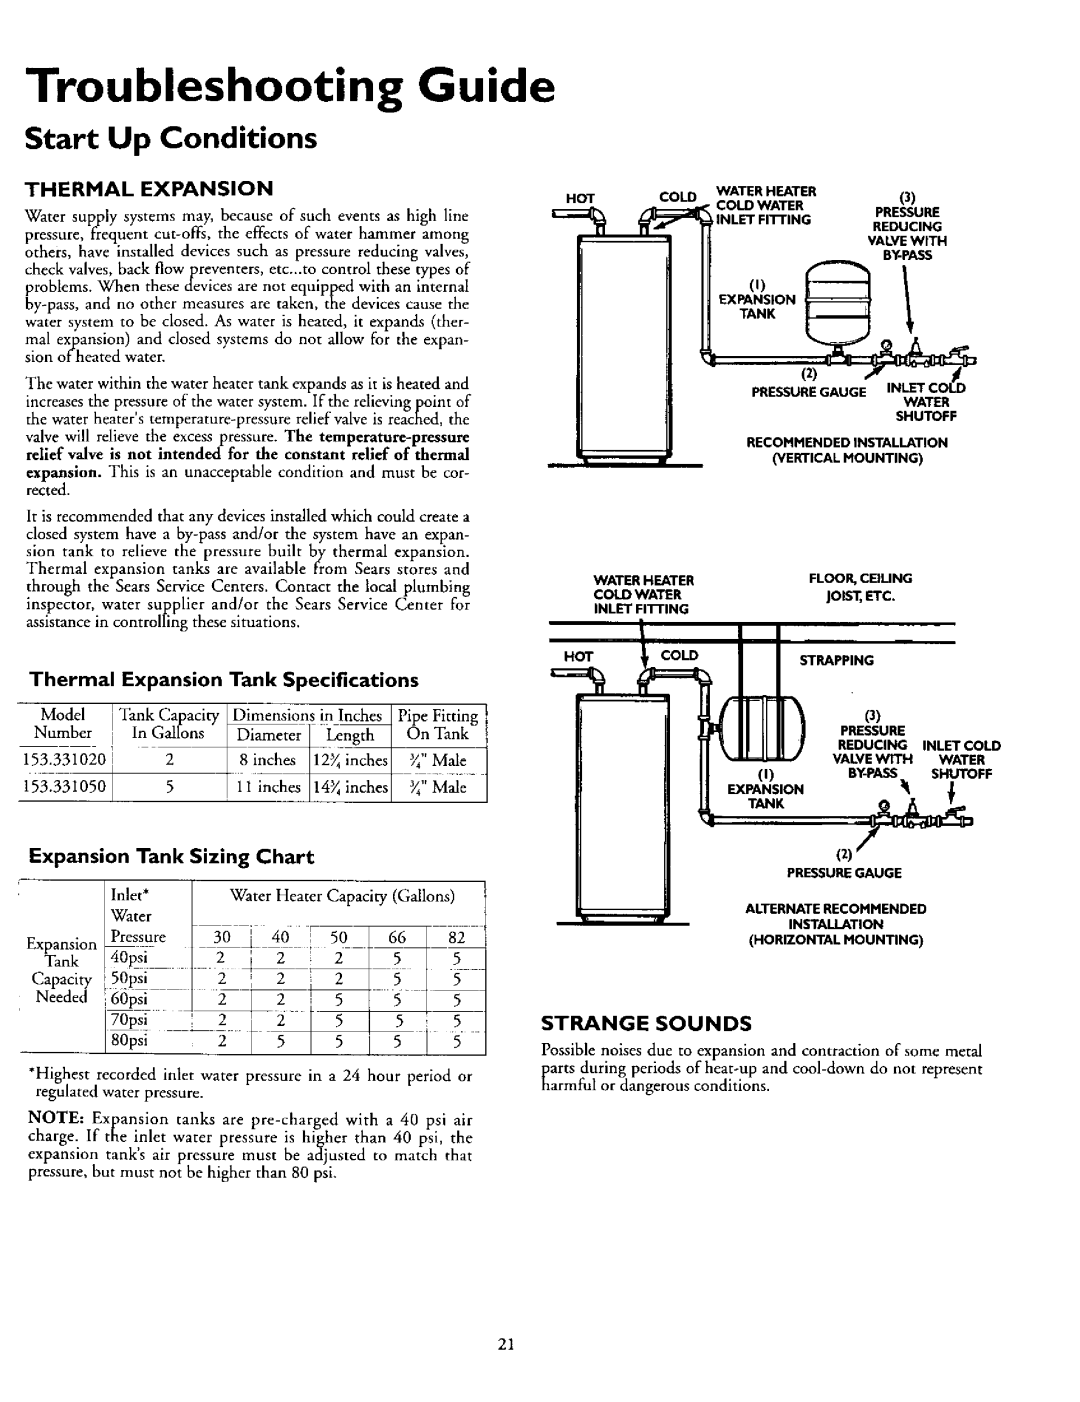 Kenmore 153.320893 HT, 153.320492 HT Troubleshooting Guide, Start Up Conditions, Expansion Tank, Sizing, Chart, 166psi 